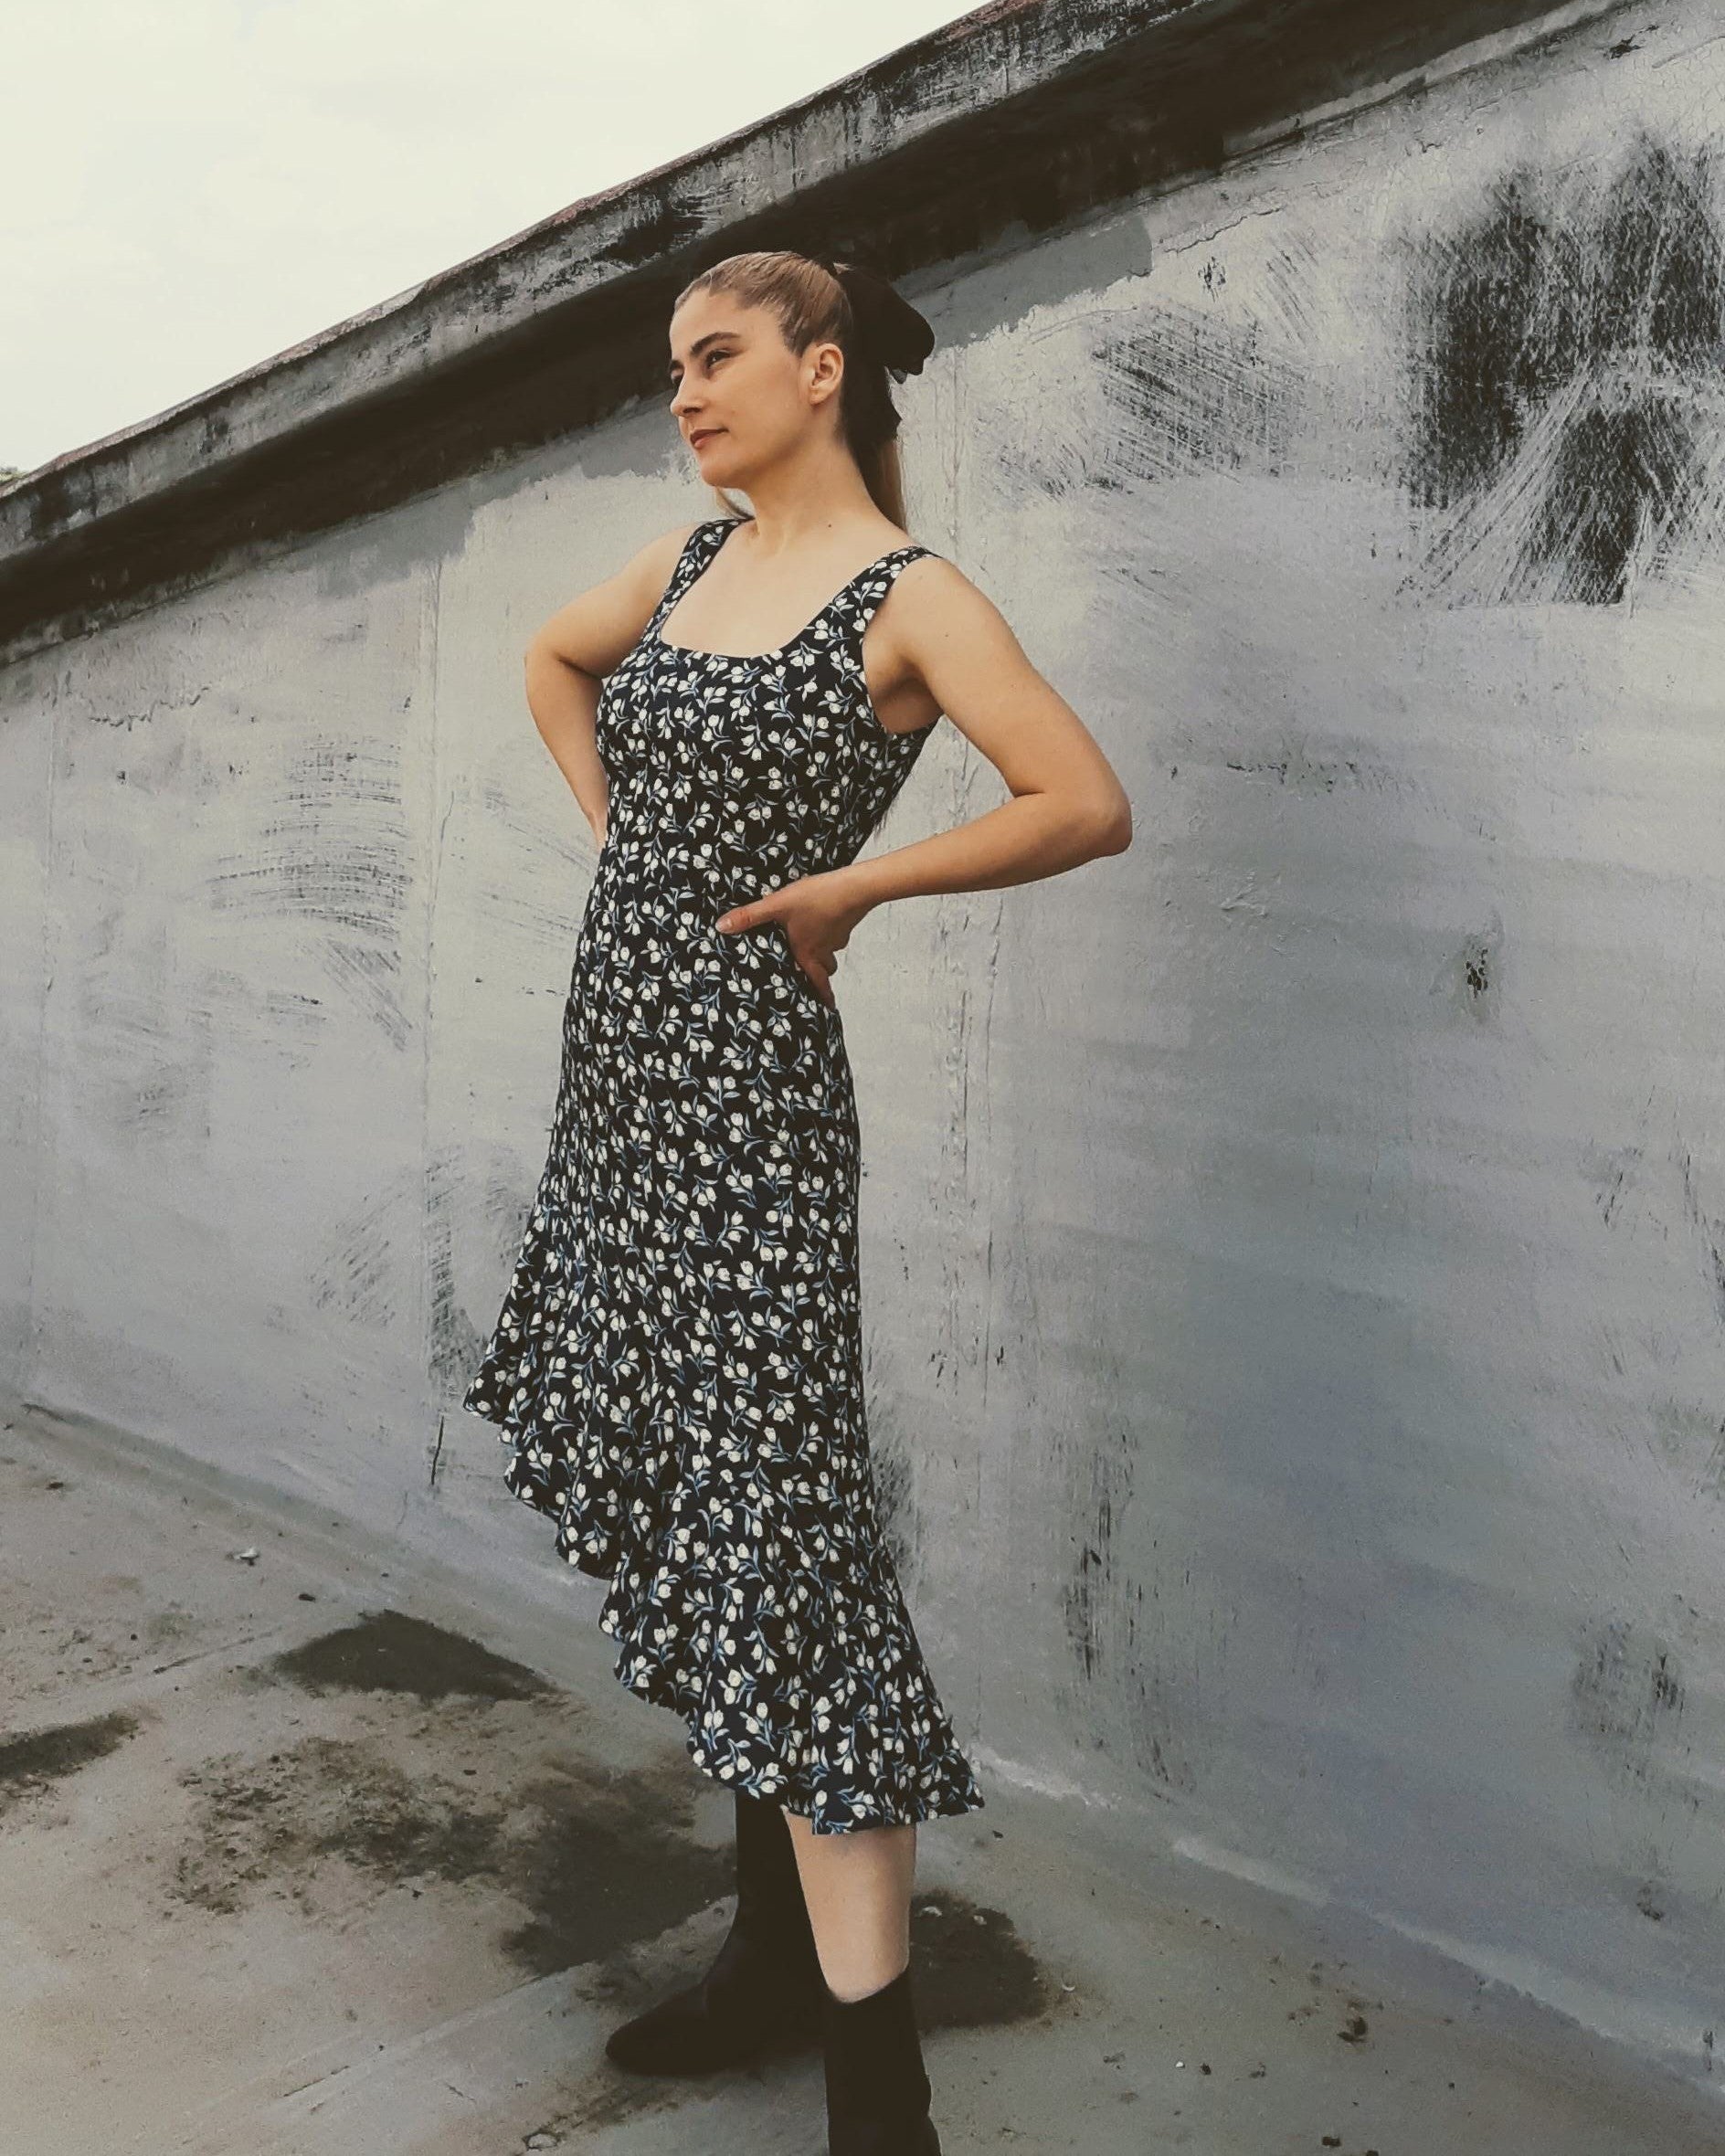 A woman with a ponytail posing in a sleeveless patterned dress.